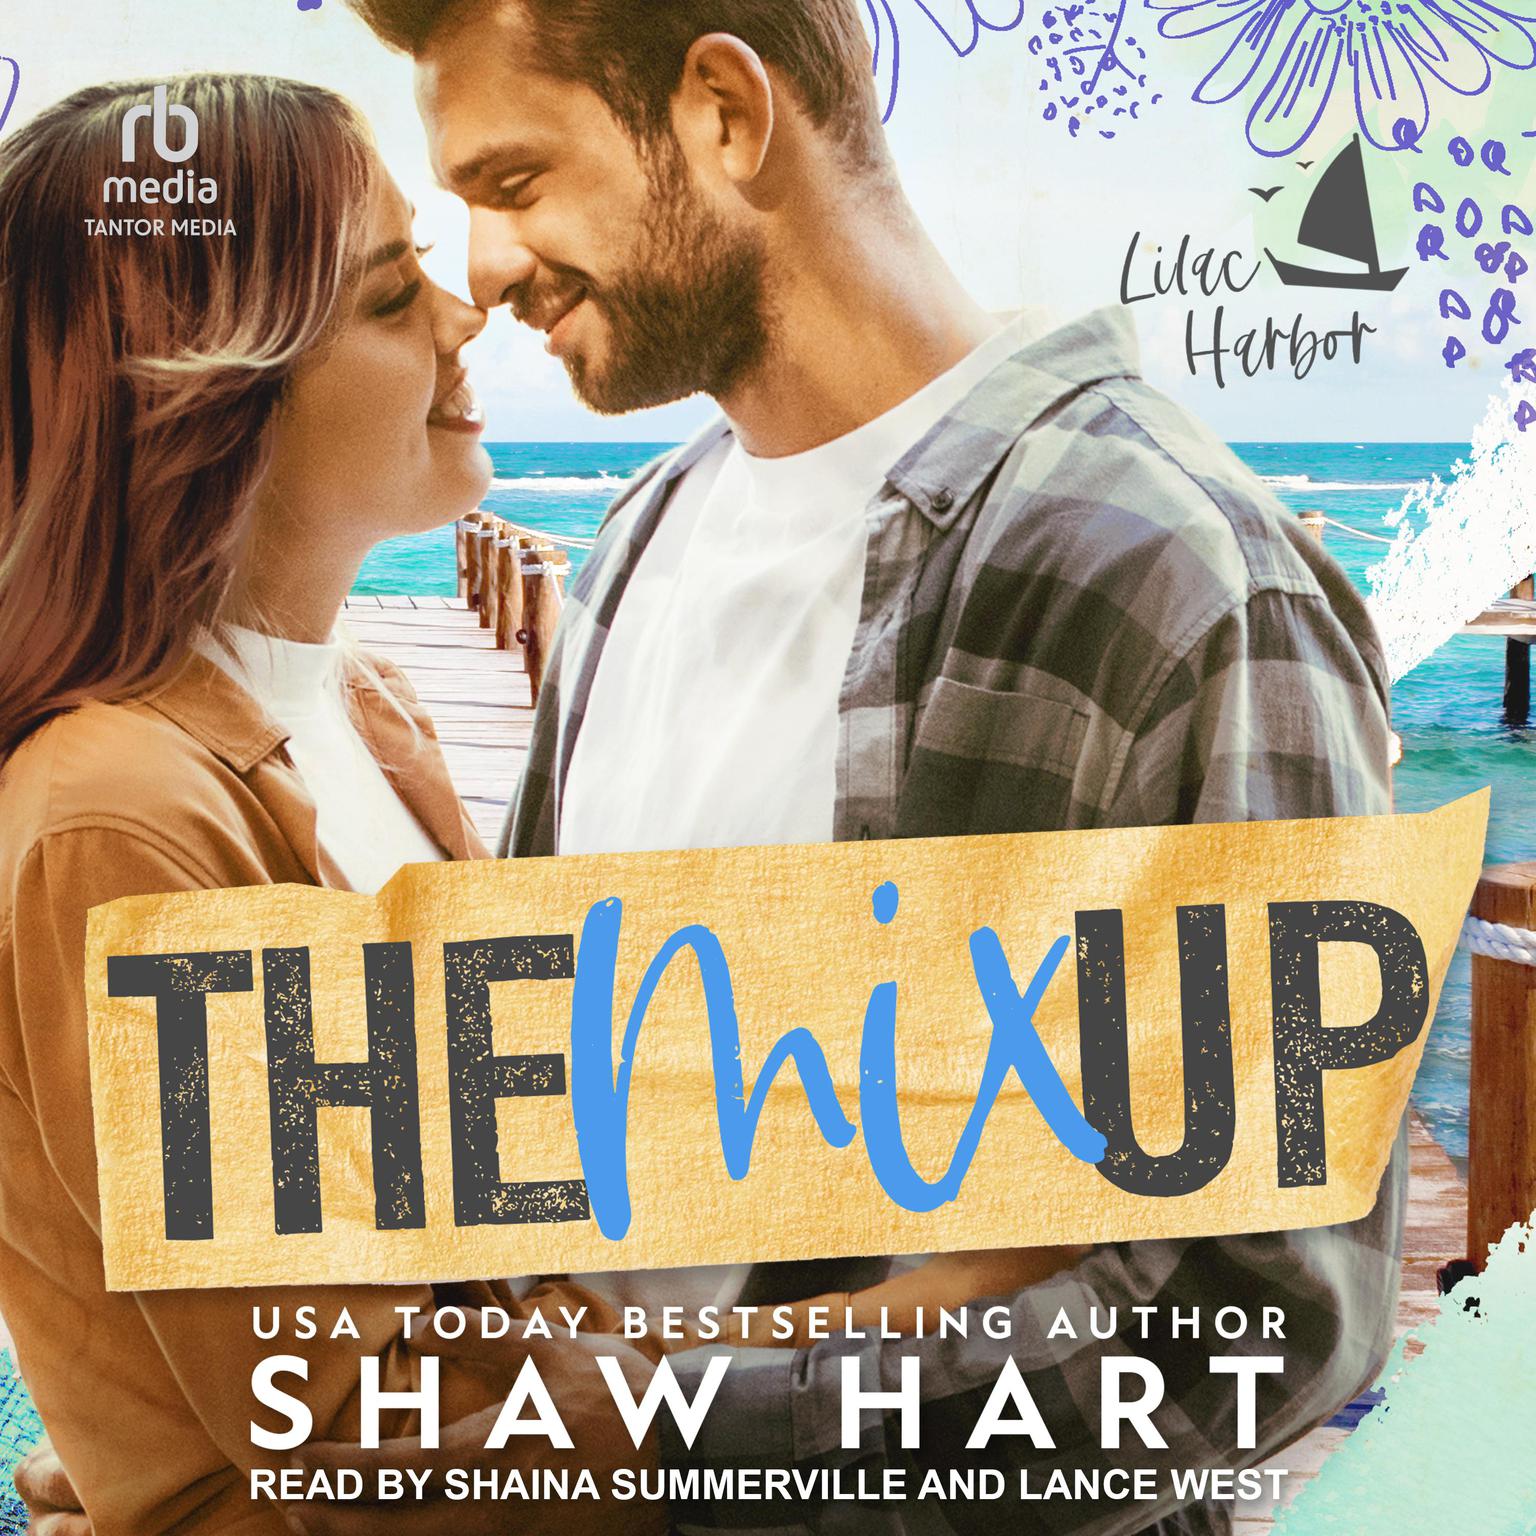 The Mix Up Audiobook, by Shaw Hart